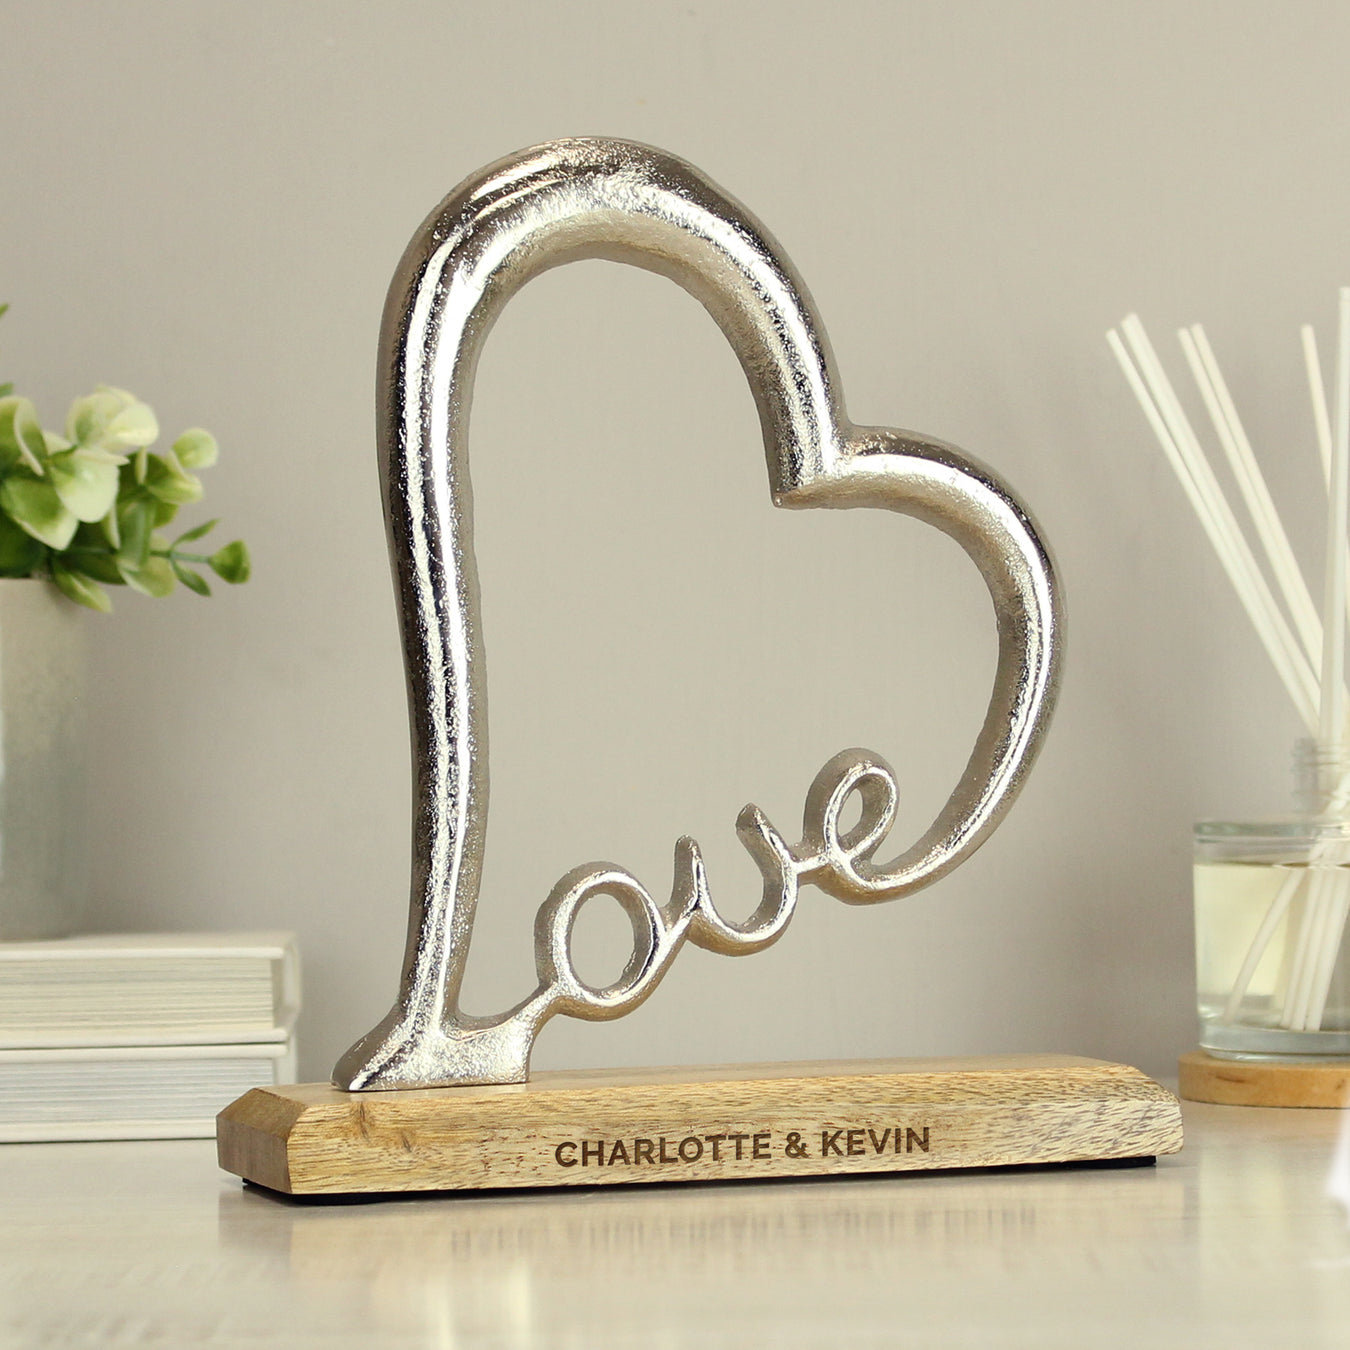 Personalised Wedding Gifts - Last Minute Delivery